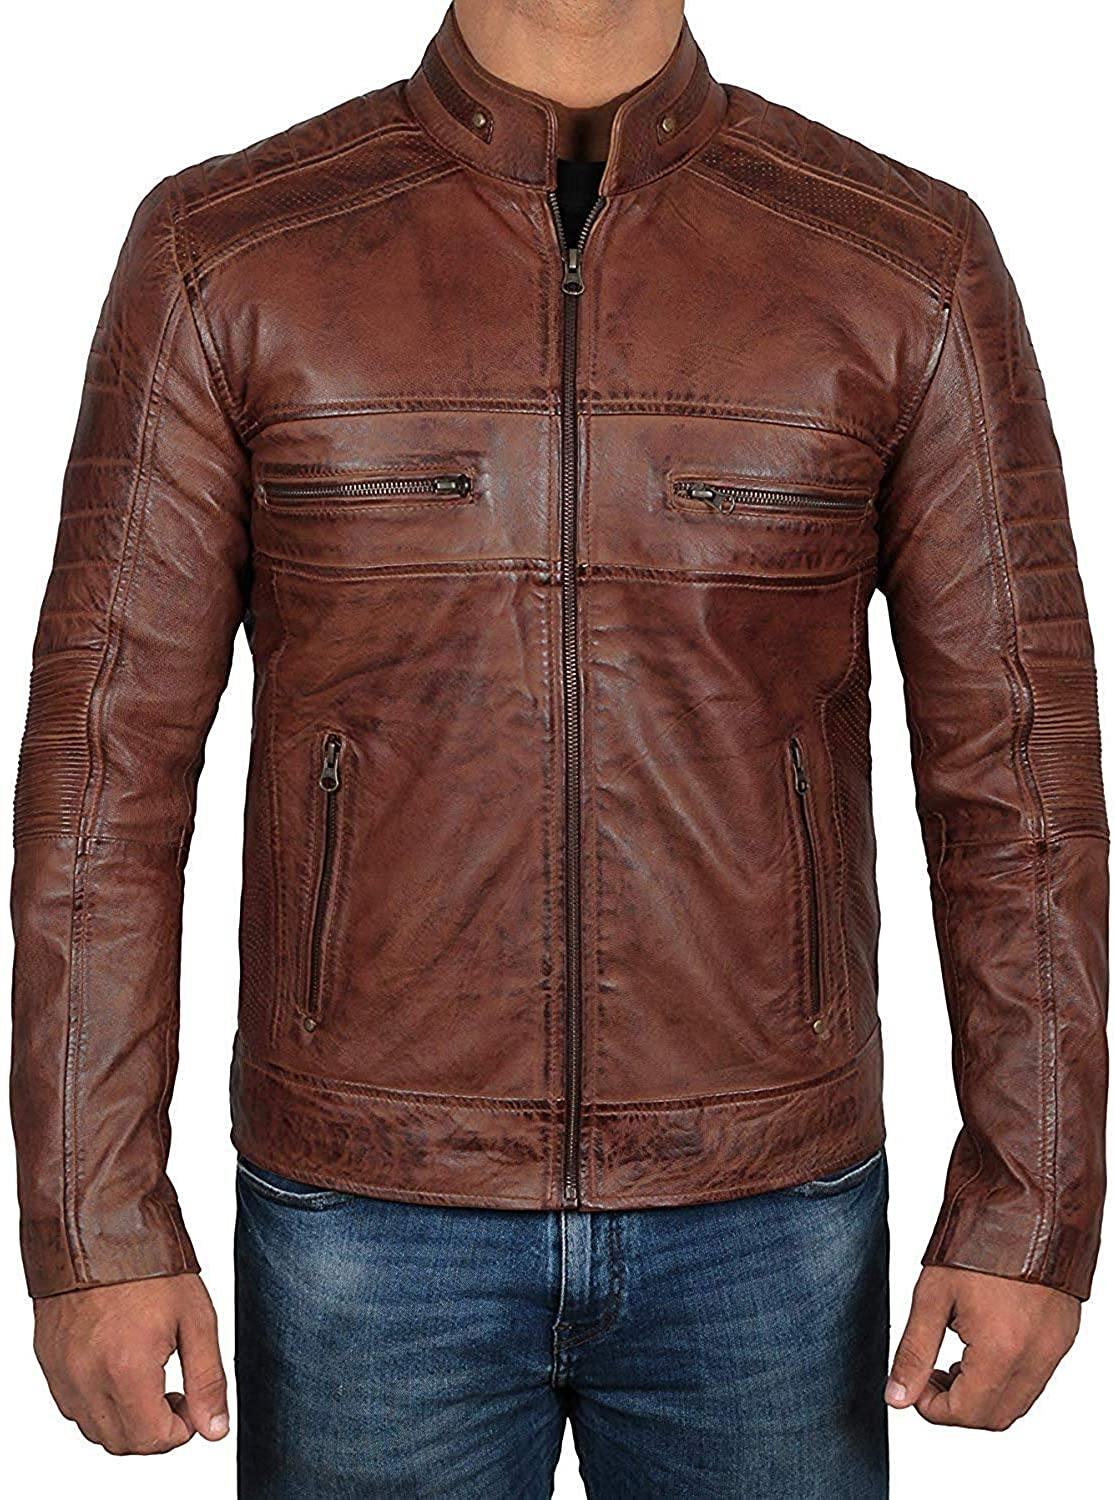 Chocolate Brown Waxed Mens Perforated Leather Jacket With Zipper Cuff - Wiseleather